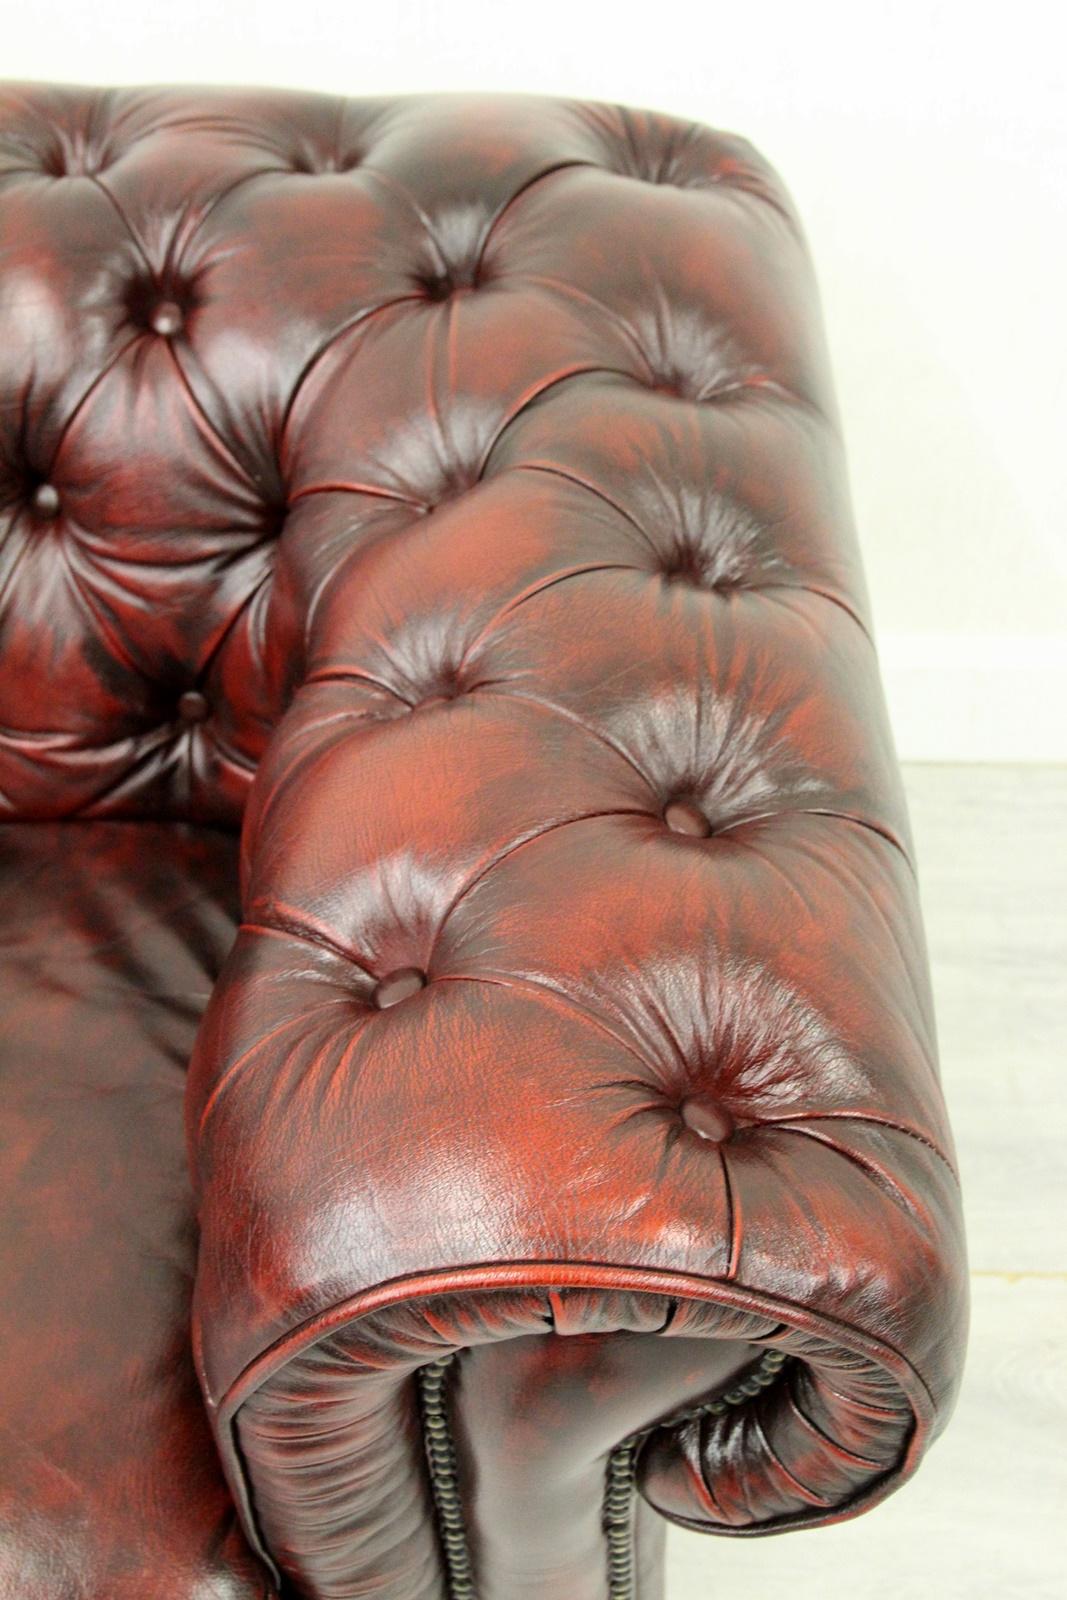 Chesterfield English Sofa Leather Antique Vintage Couch Chippendale (Ende des 20. Jahrhunderts) im Angebot